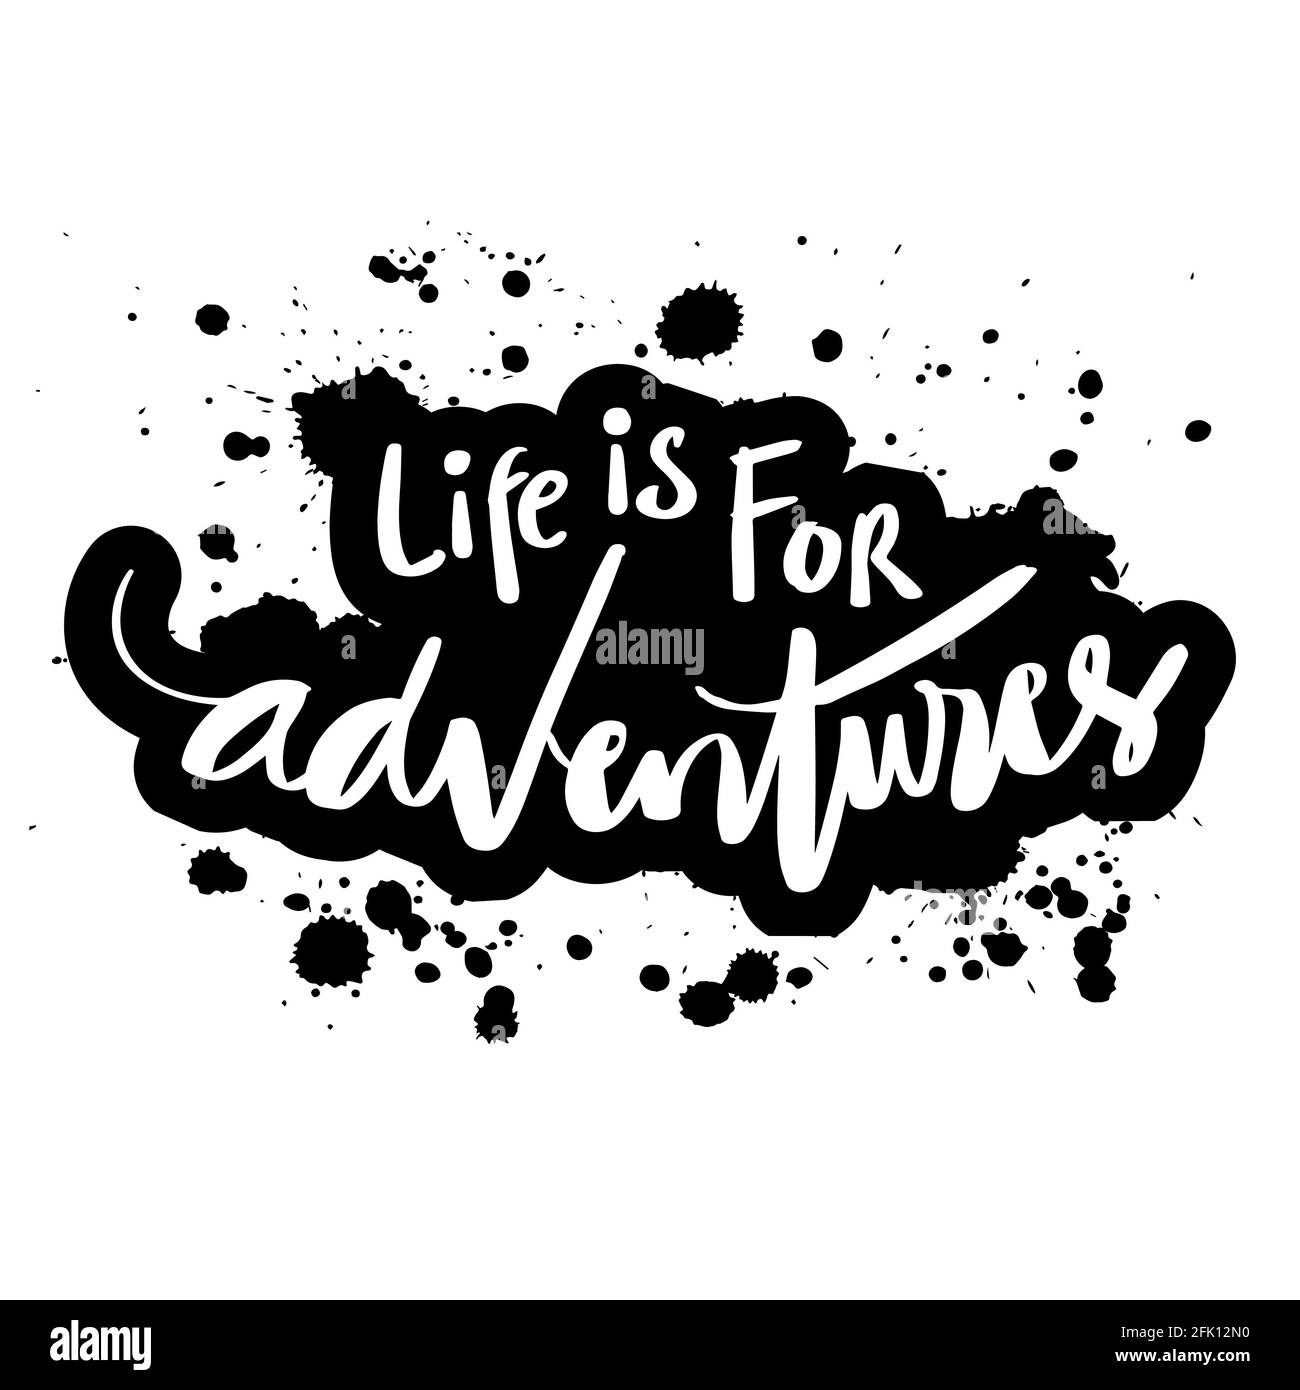 Life is for adventure. Hand lettering. Motivational quote. Stock Photo